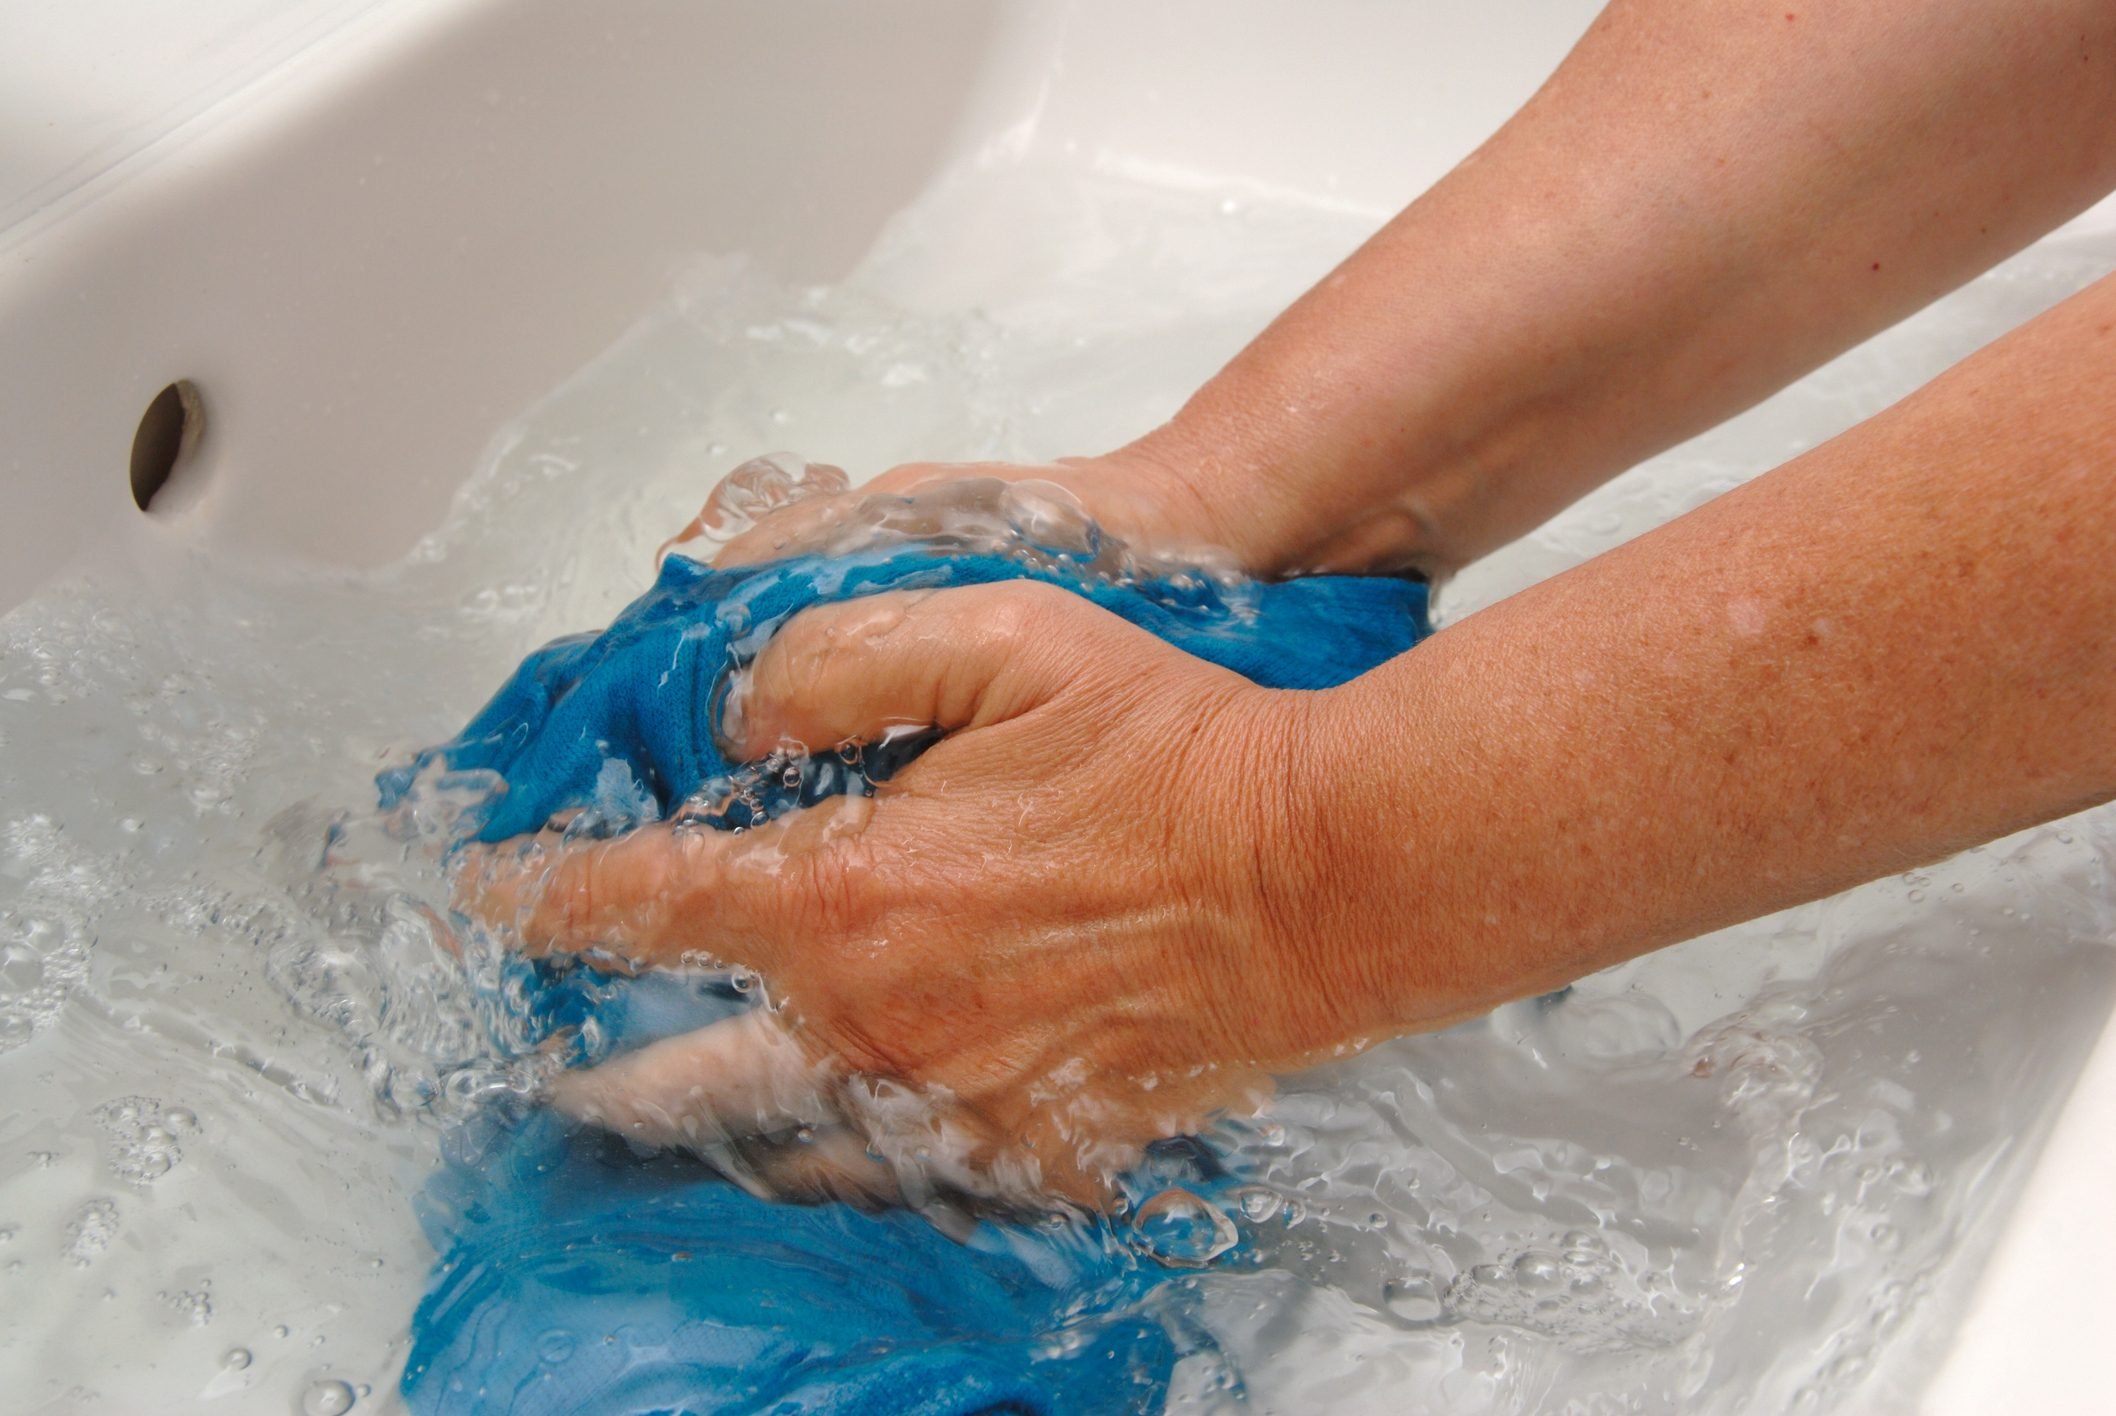 Is Handwashing Better for Your Clothes?